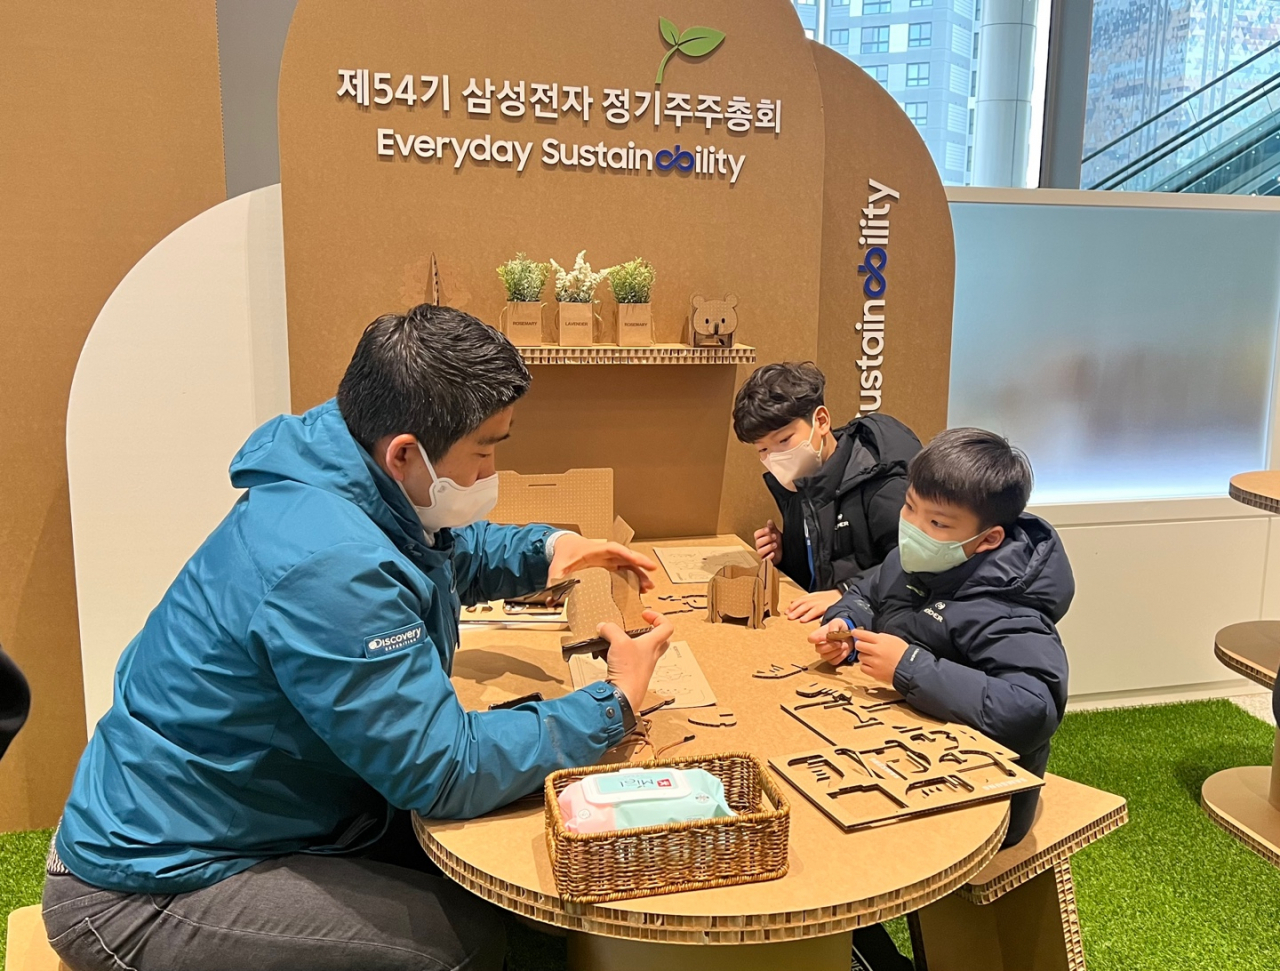 A Samsung Electronics shareholder attends the company's annual shareholders meeting with his children in Suwon, Gyeonggi Province, Wednesday. (Jo He-rim/The Korea Herald)